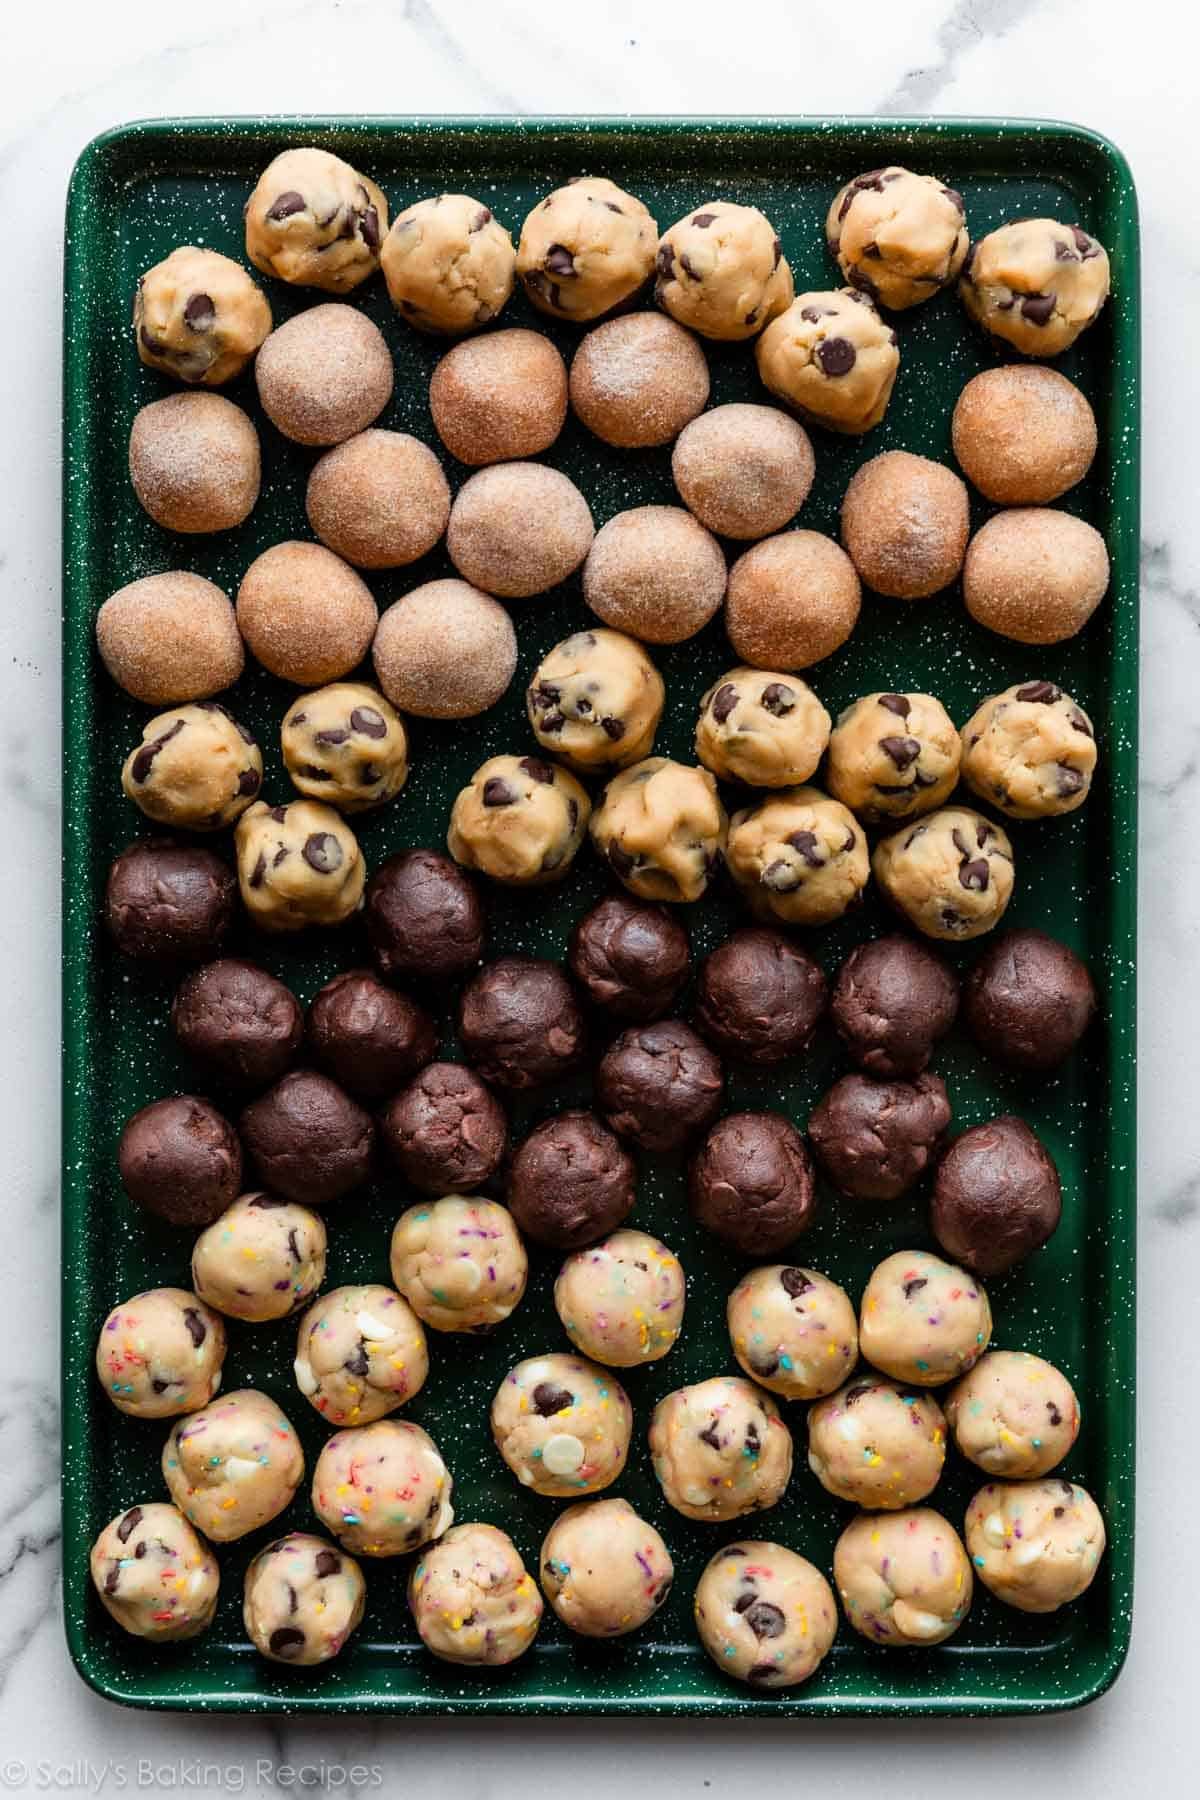 multiple varieties of frozen cookie dough balls on green baking sheet including chocolate chip cookie, chocolate chocolate chip, and snickerdoodles.